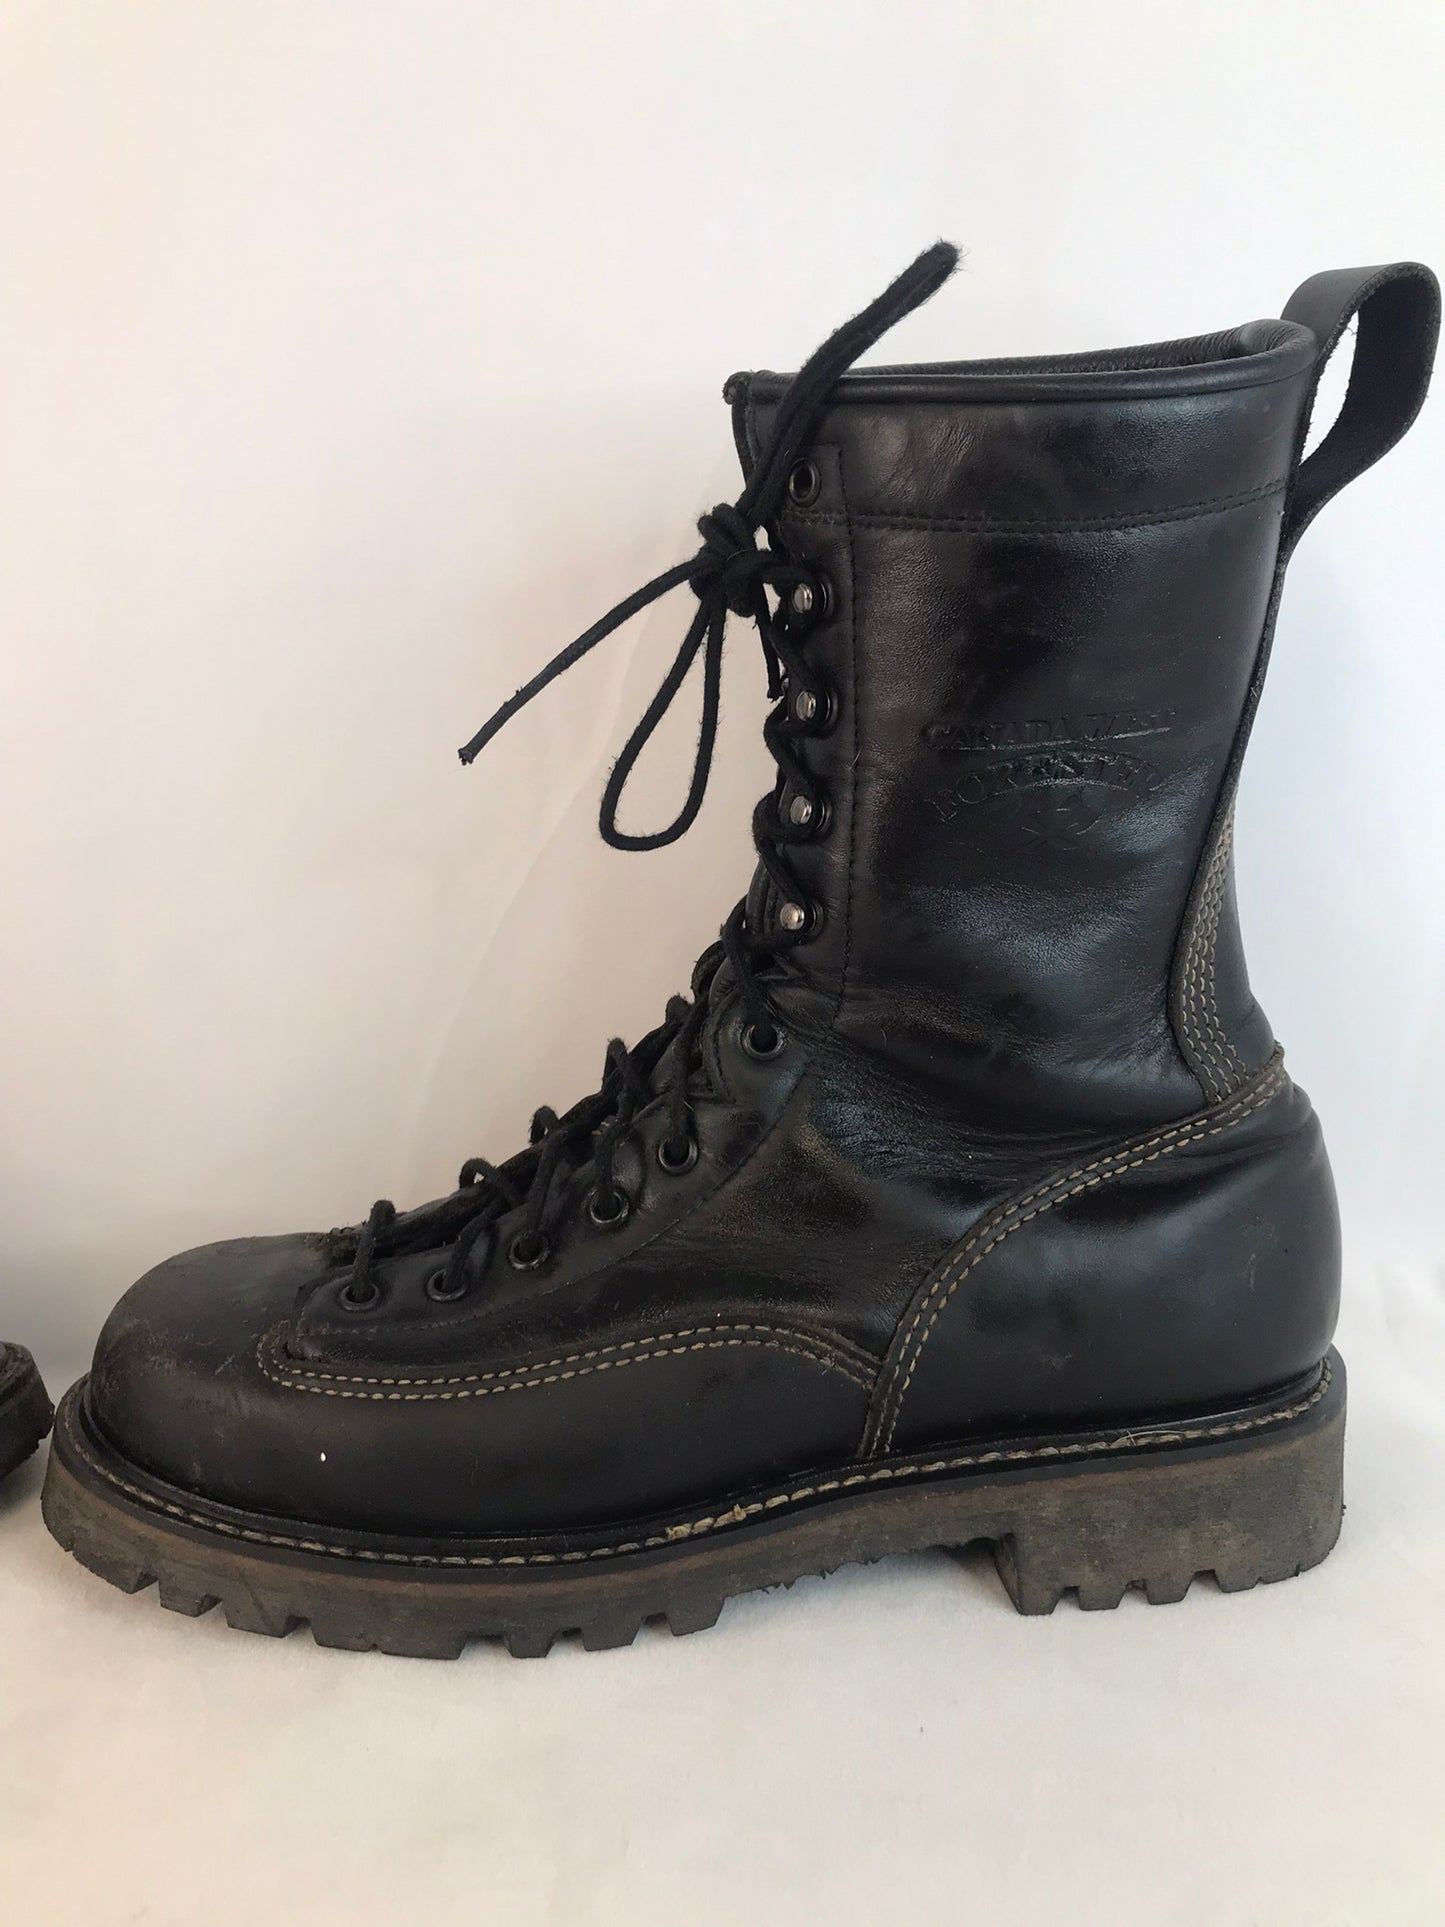 Work Boots Men's Size 9.5 EEE #14394 Canada West Forester Black Fire Retardant Leather Laces Vibram Soles Kevlar Threading Worn Once Retail 379.99 As New